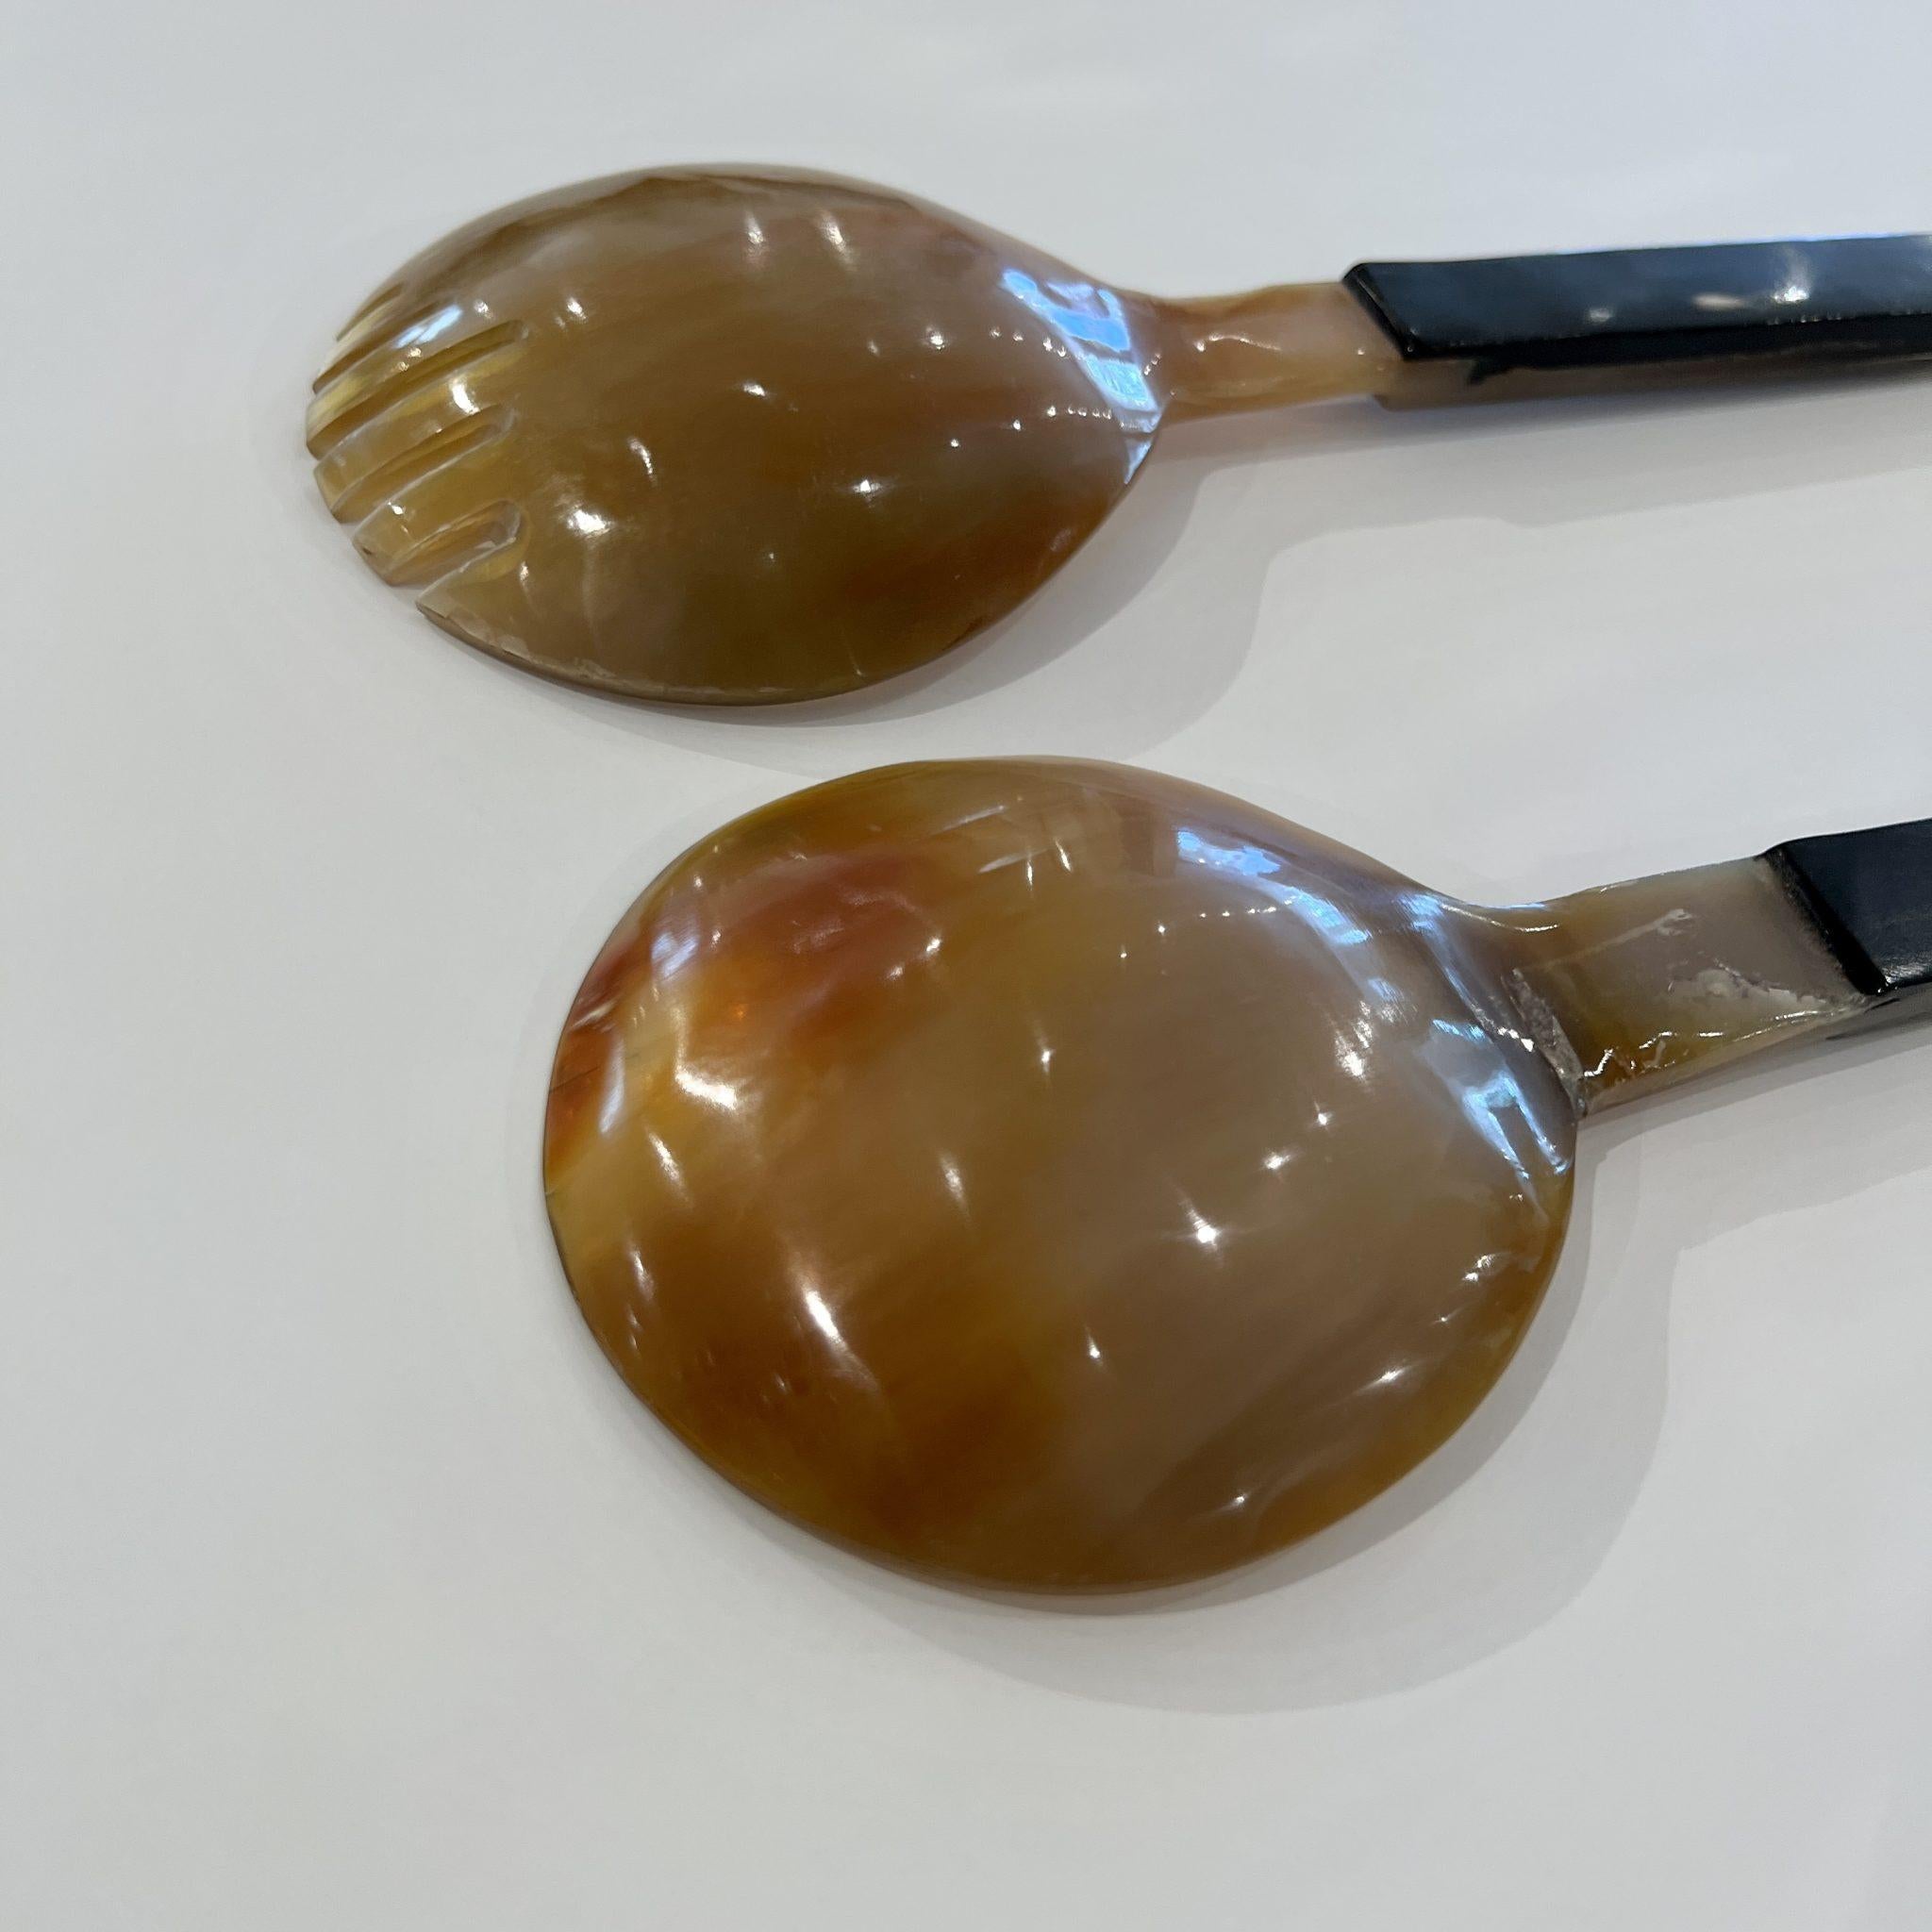 Bold and organic. These carved bone serving spoons or salad tossers are beautifully designed and ultra practical.